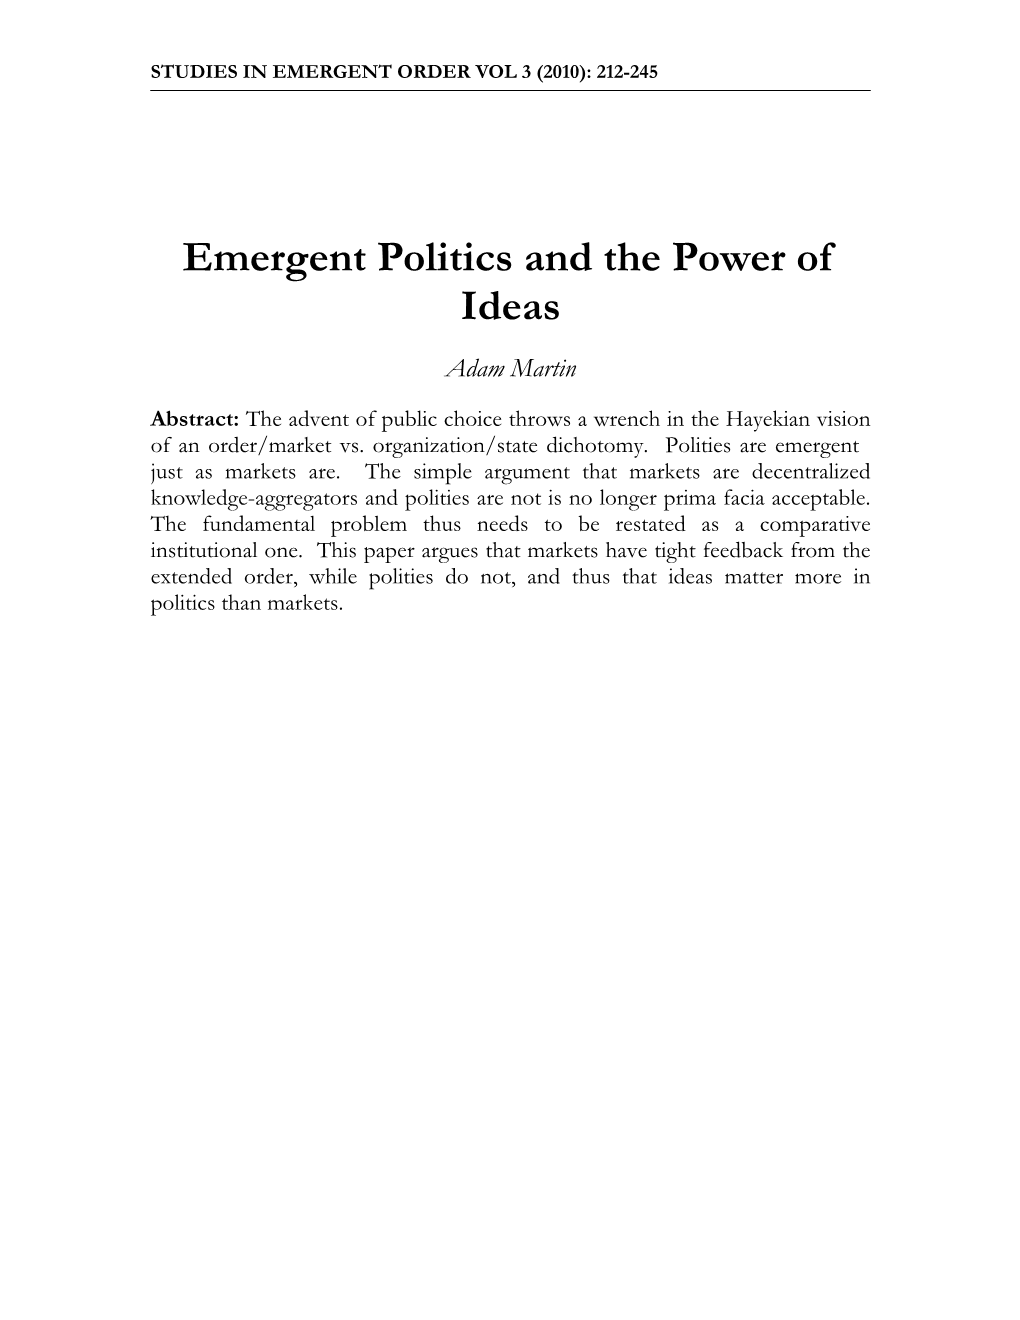 Emergent Politics and the Power of Ideas*